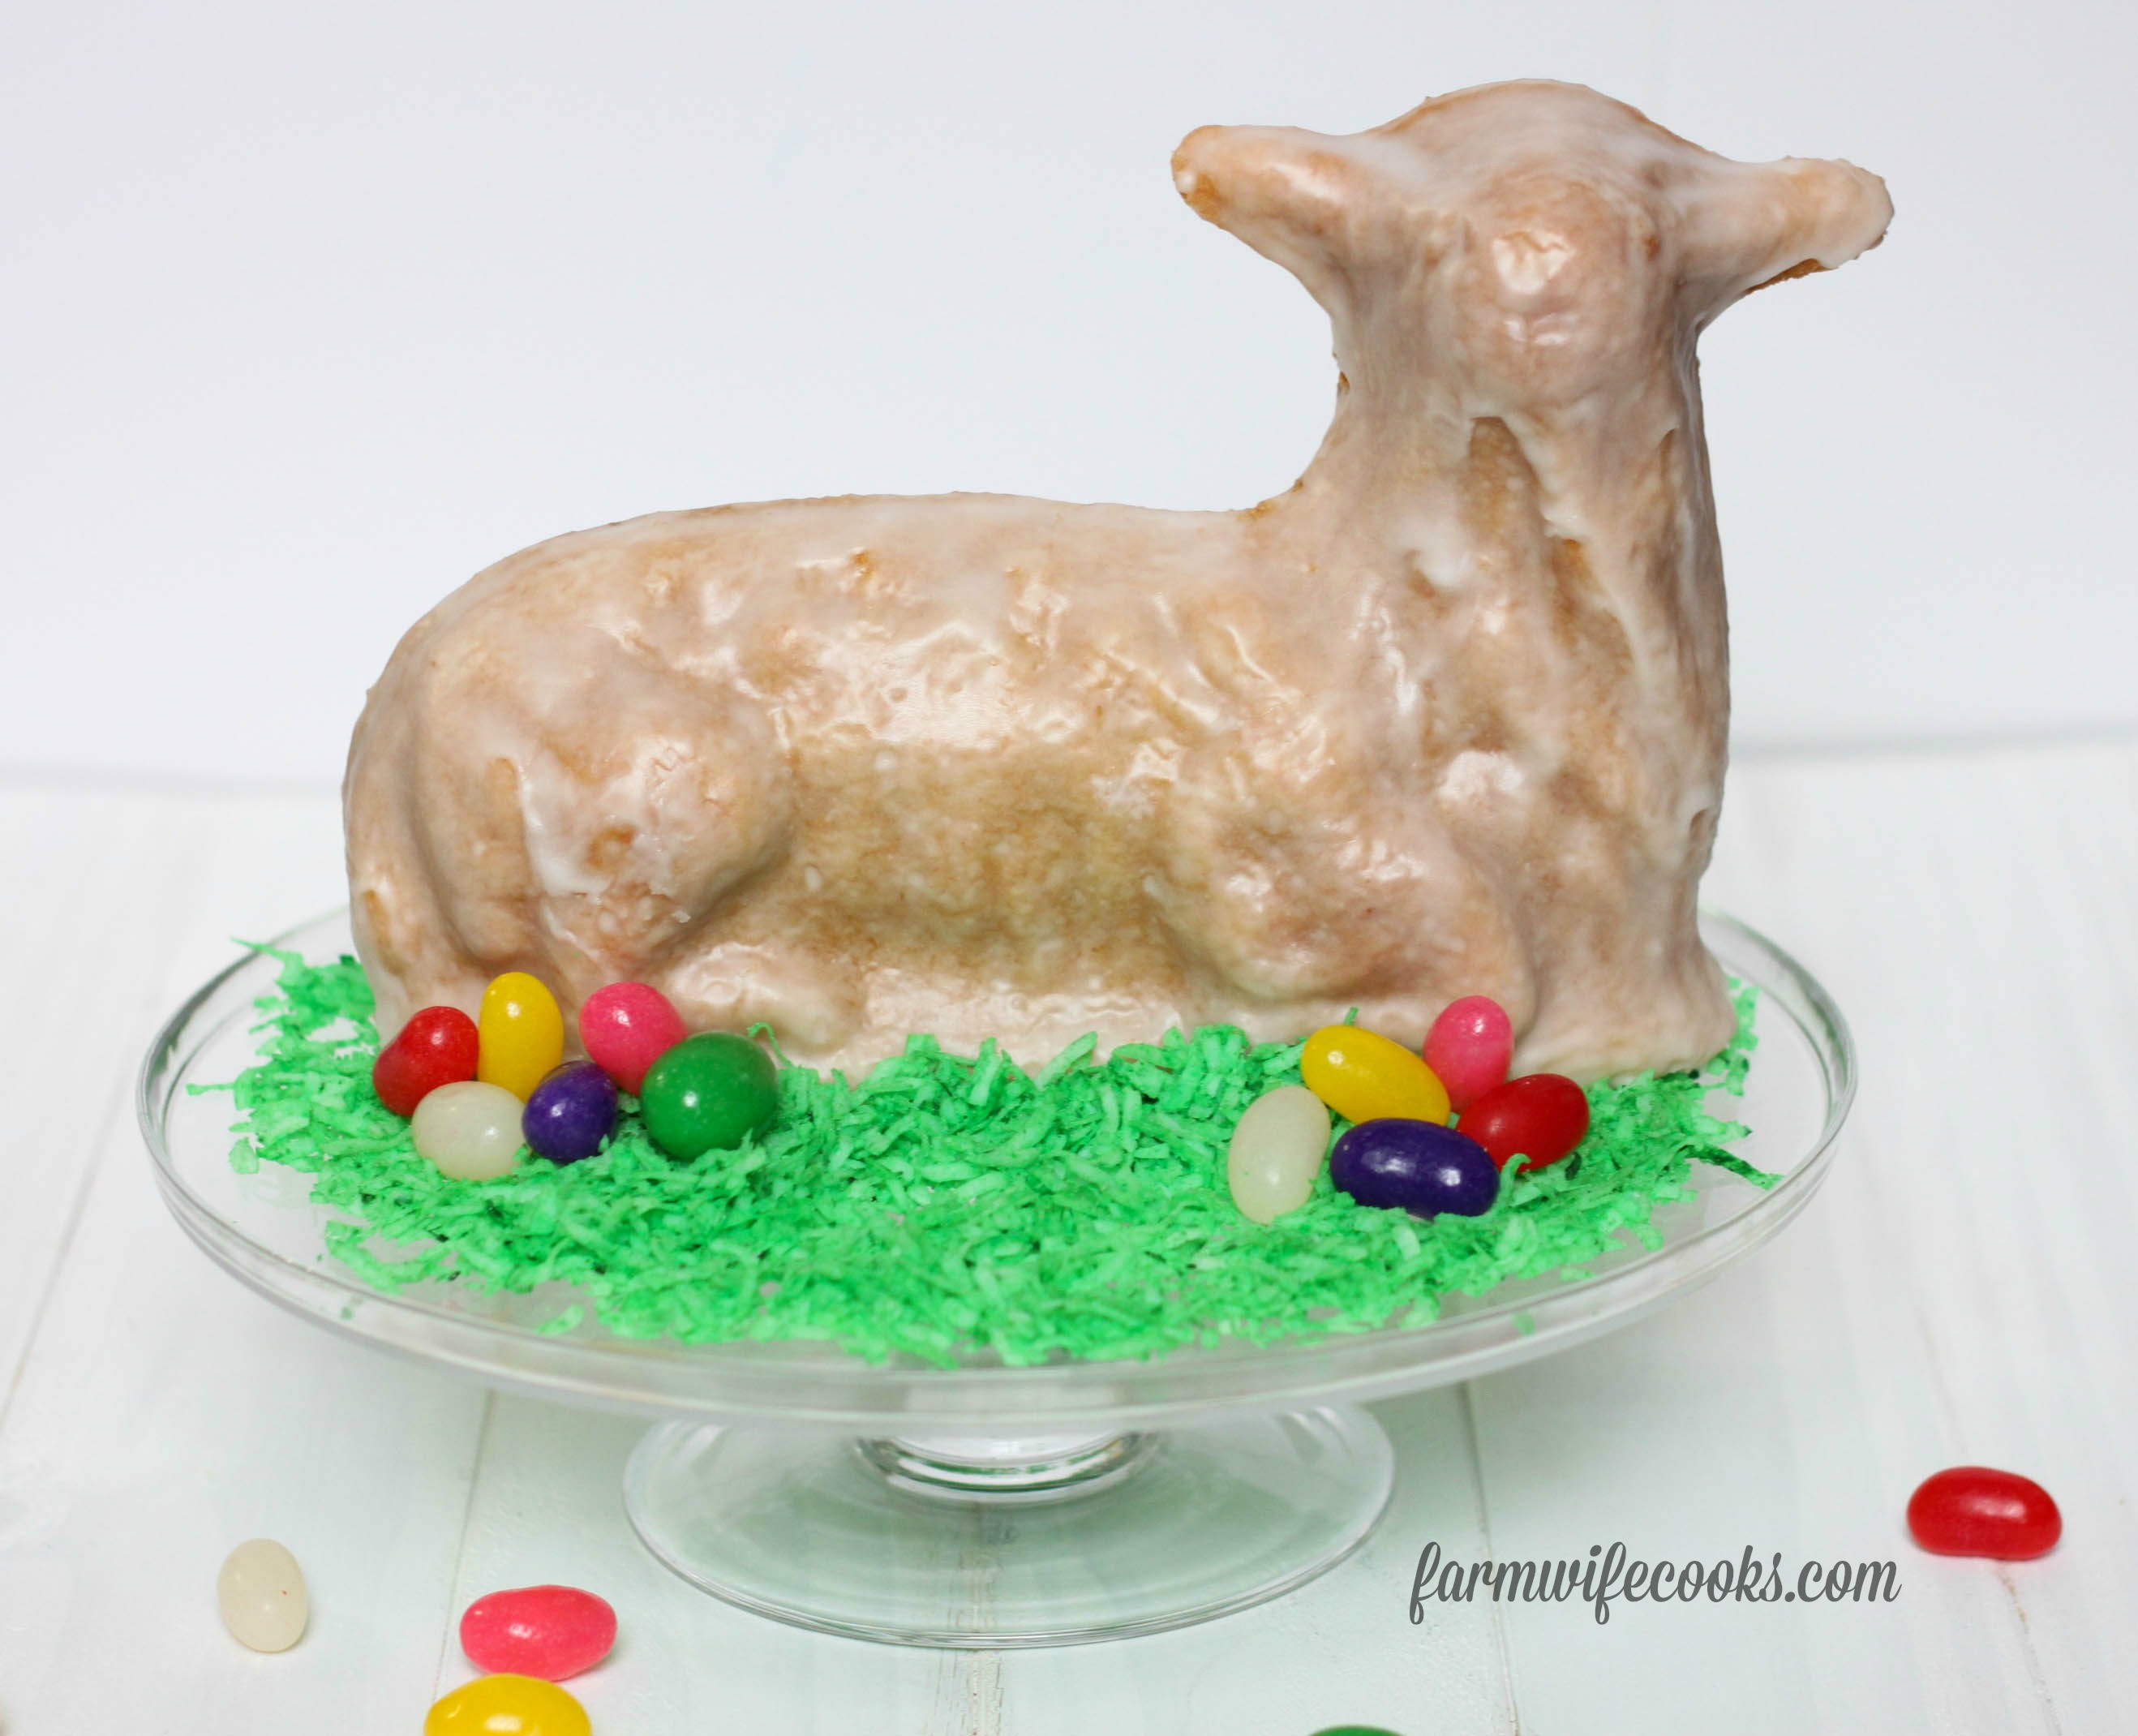 Easter Lamb Cake
 3 Ways to Decorate an Easter Lamb Cake The Farmwife Cooks